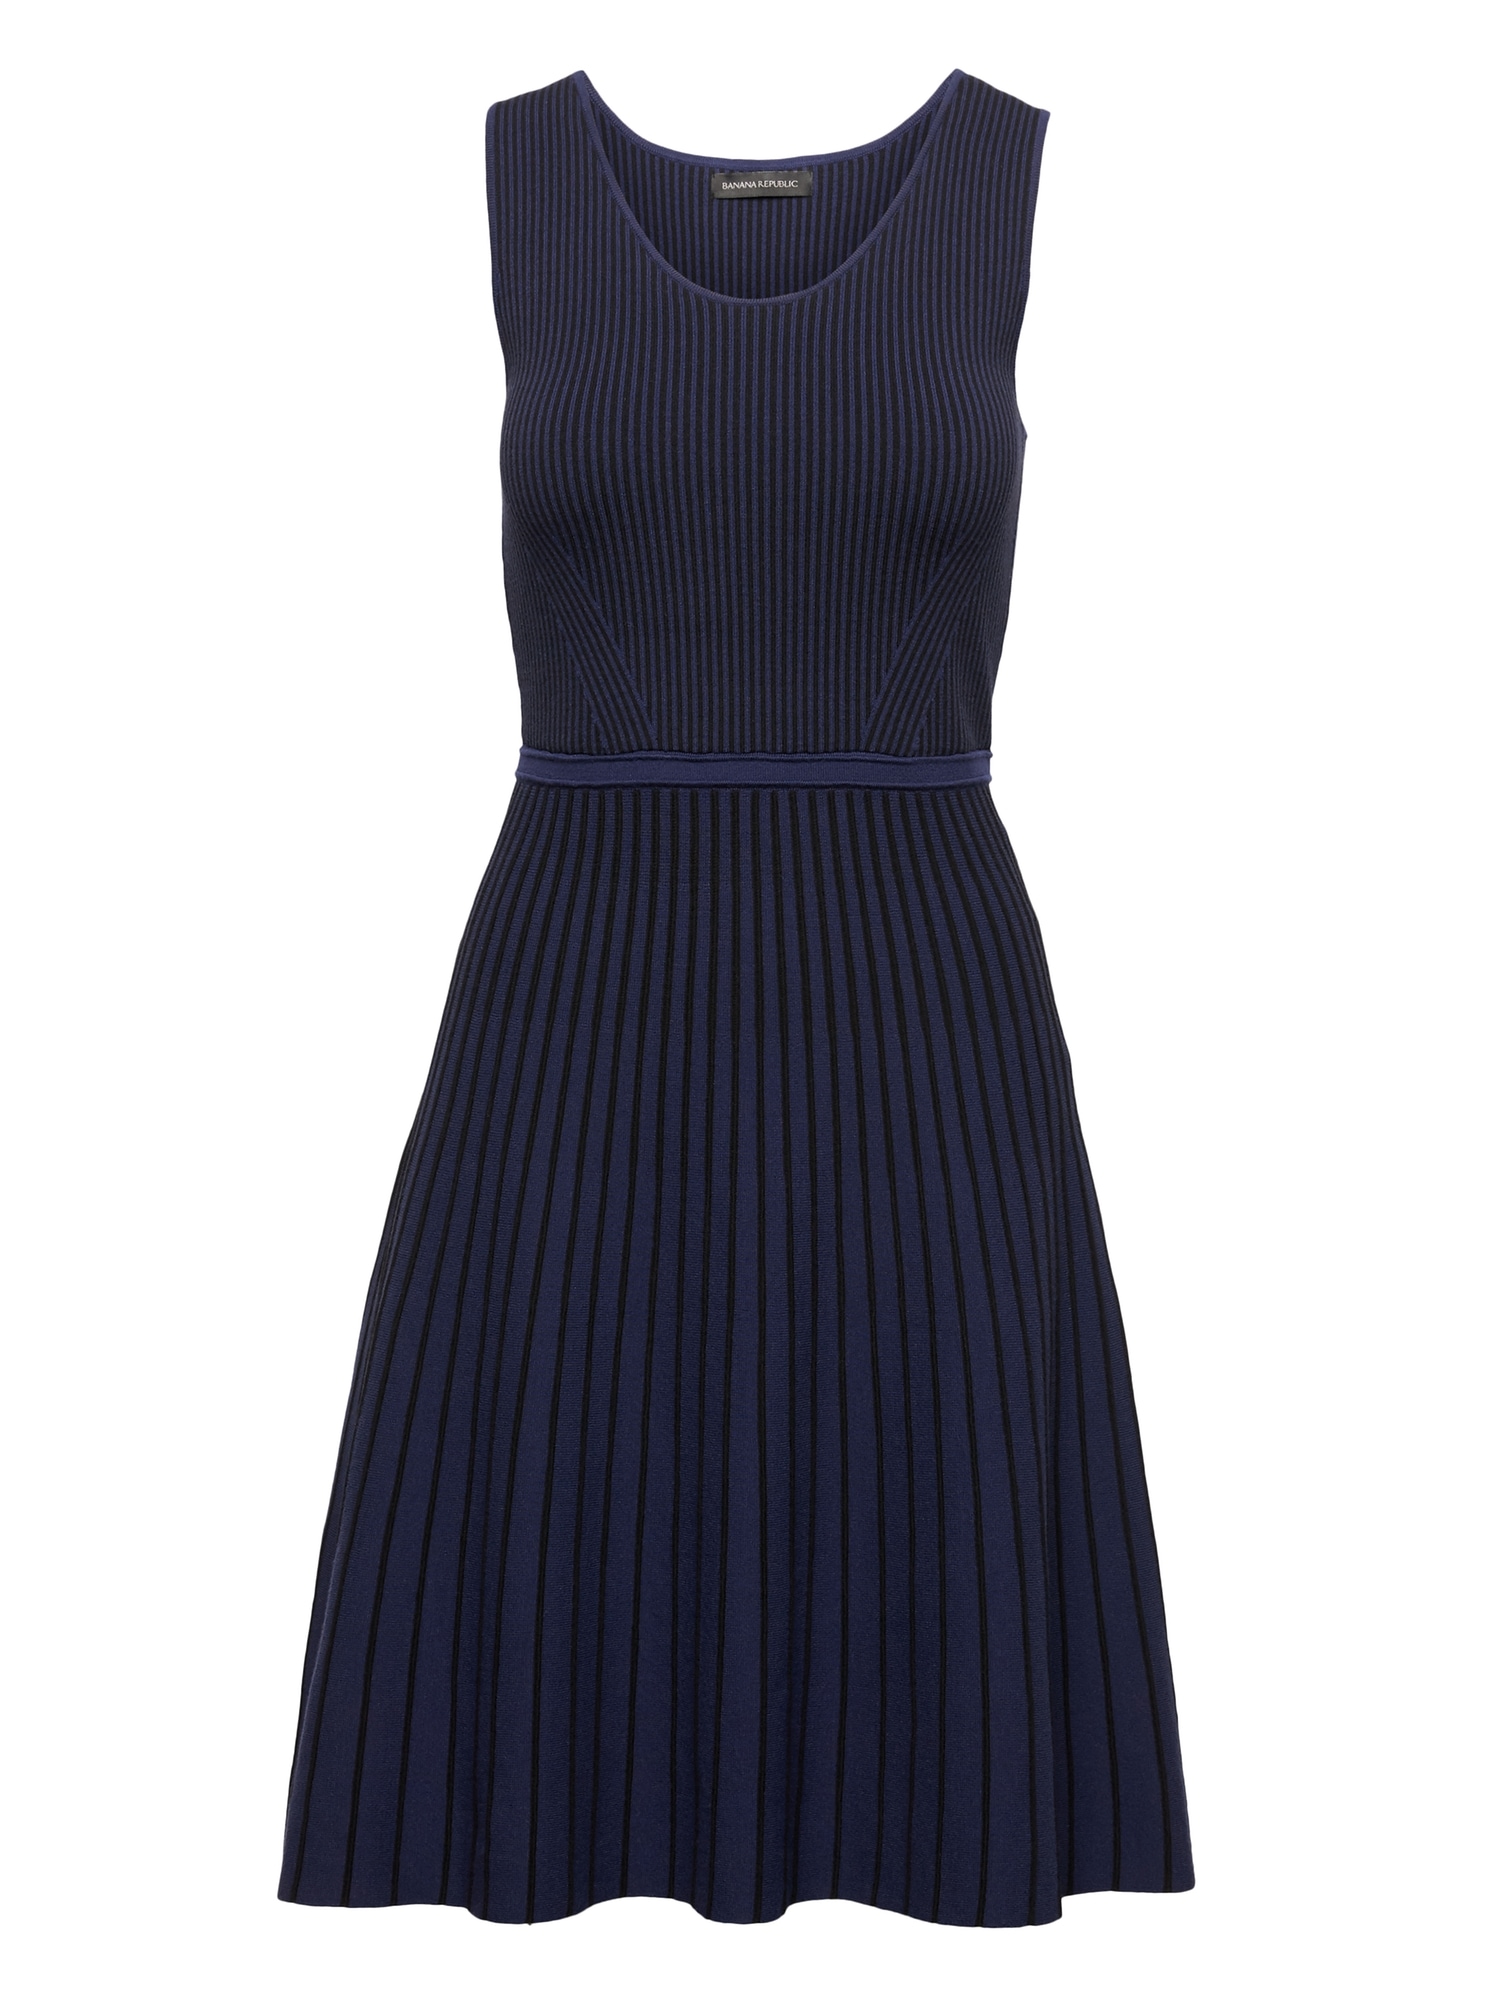 Stripe-Knit Fit-and-Flare Dress